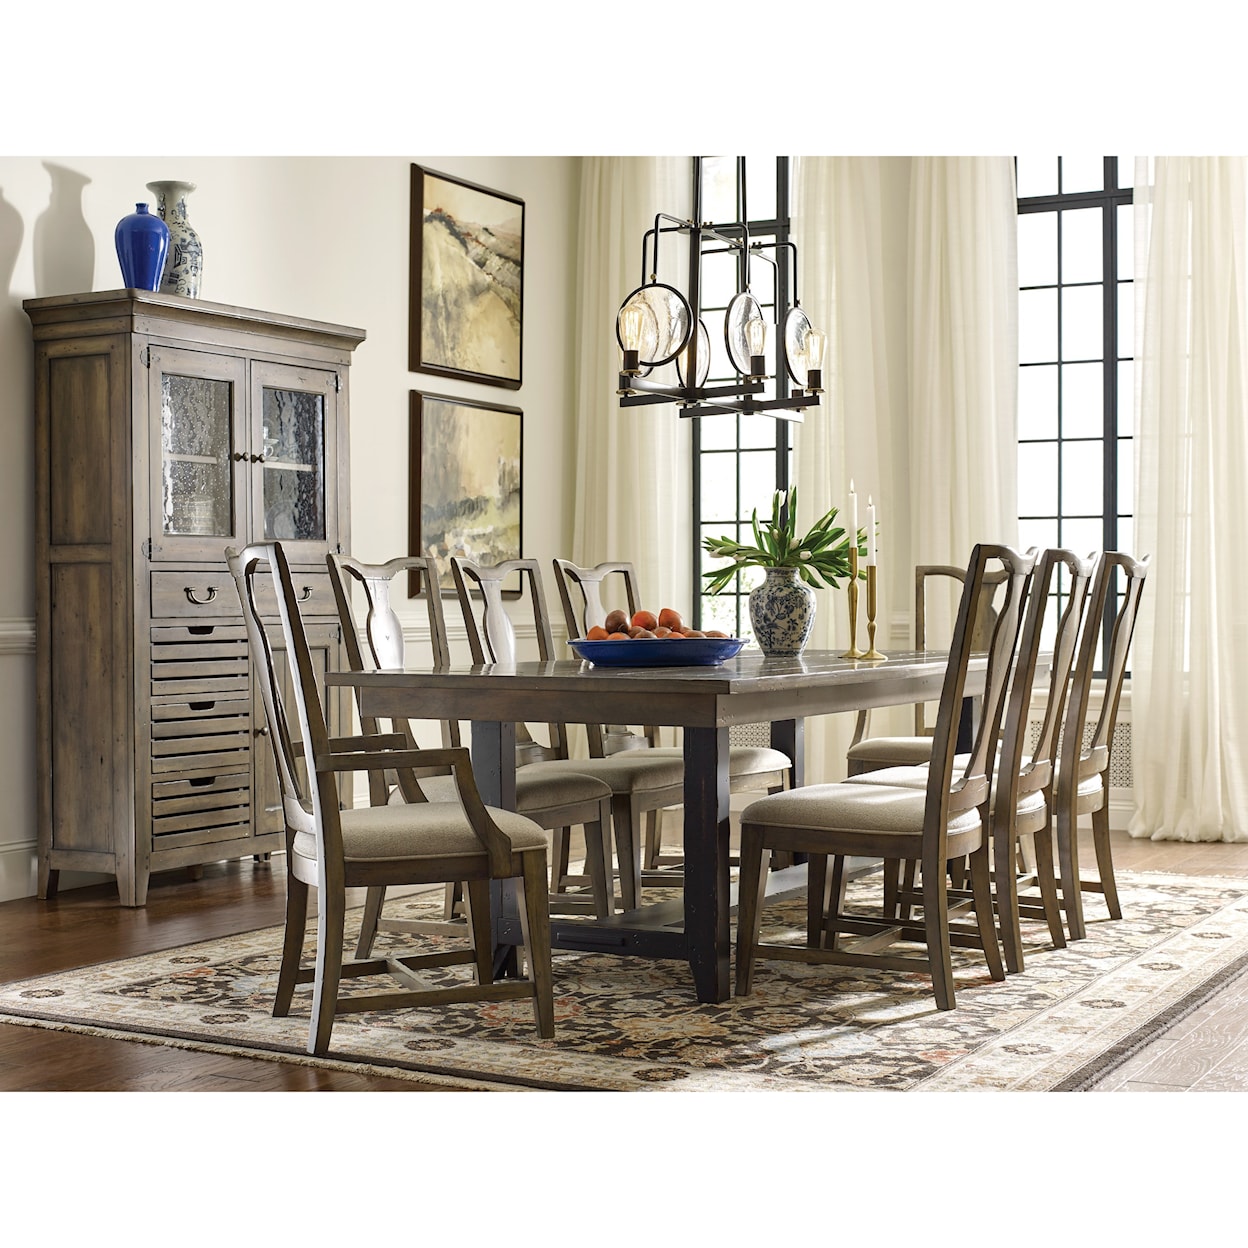 Kincaid Furniture Mill House Formal Dining Room Group